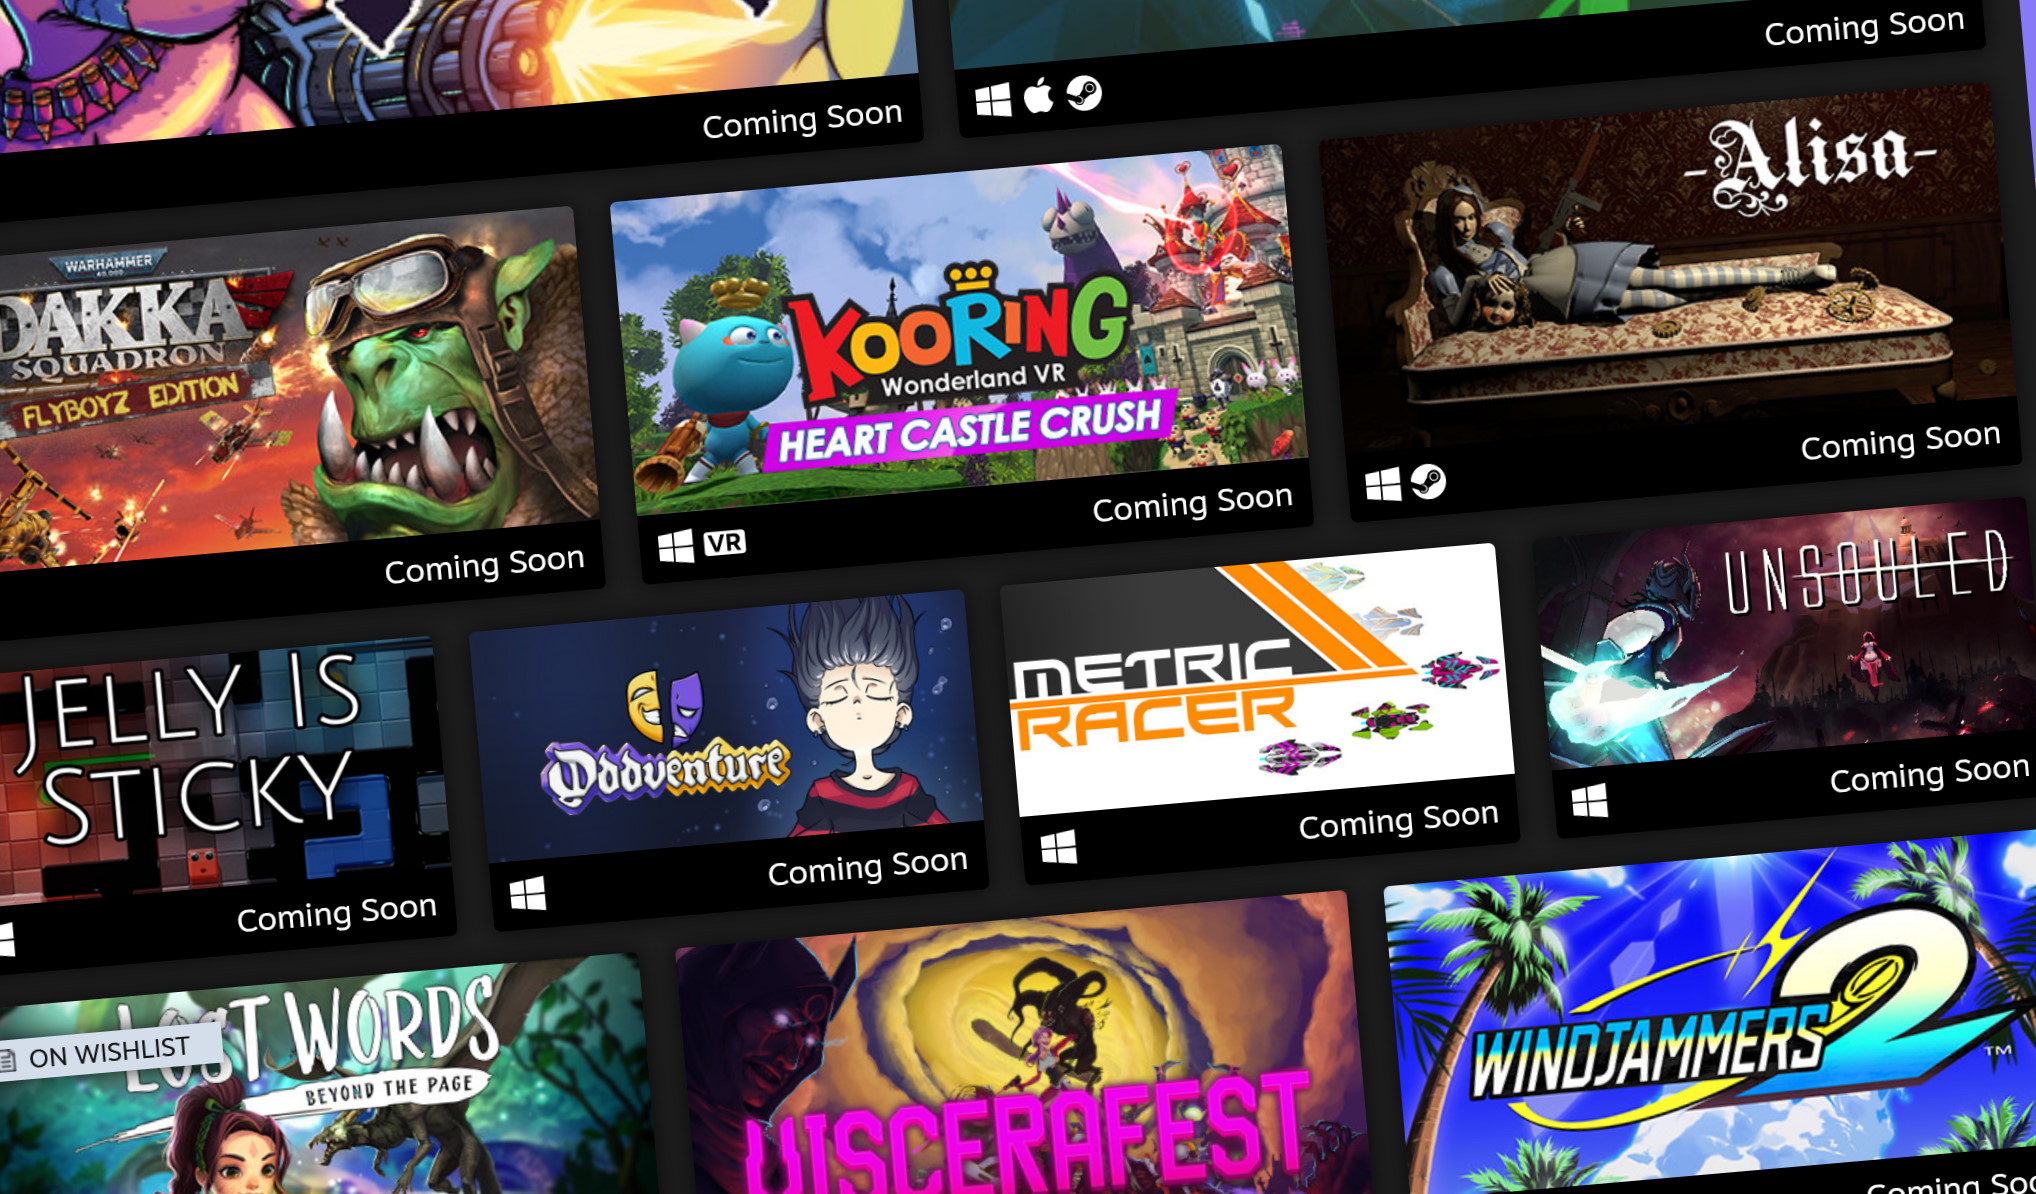  Steam Game Festival goes live with more than 500 free demos, plus developer chats and livestreams 